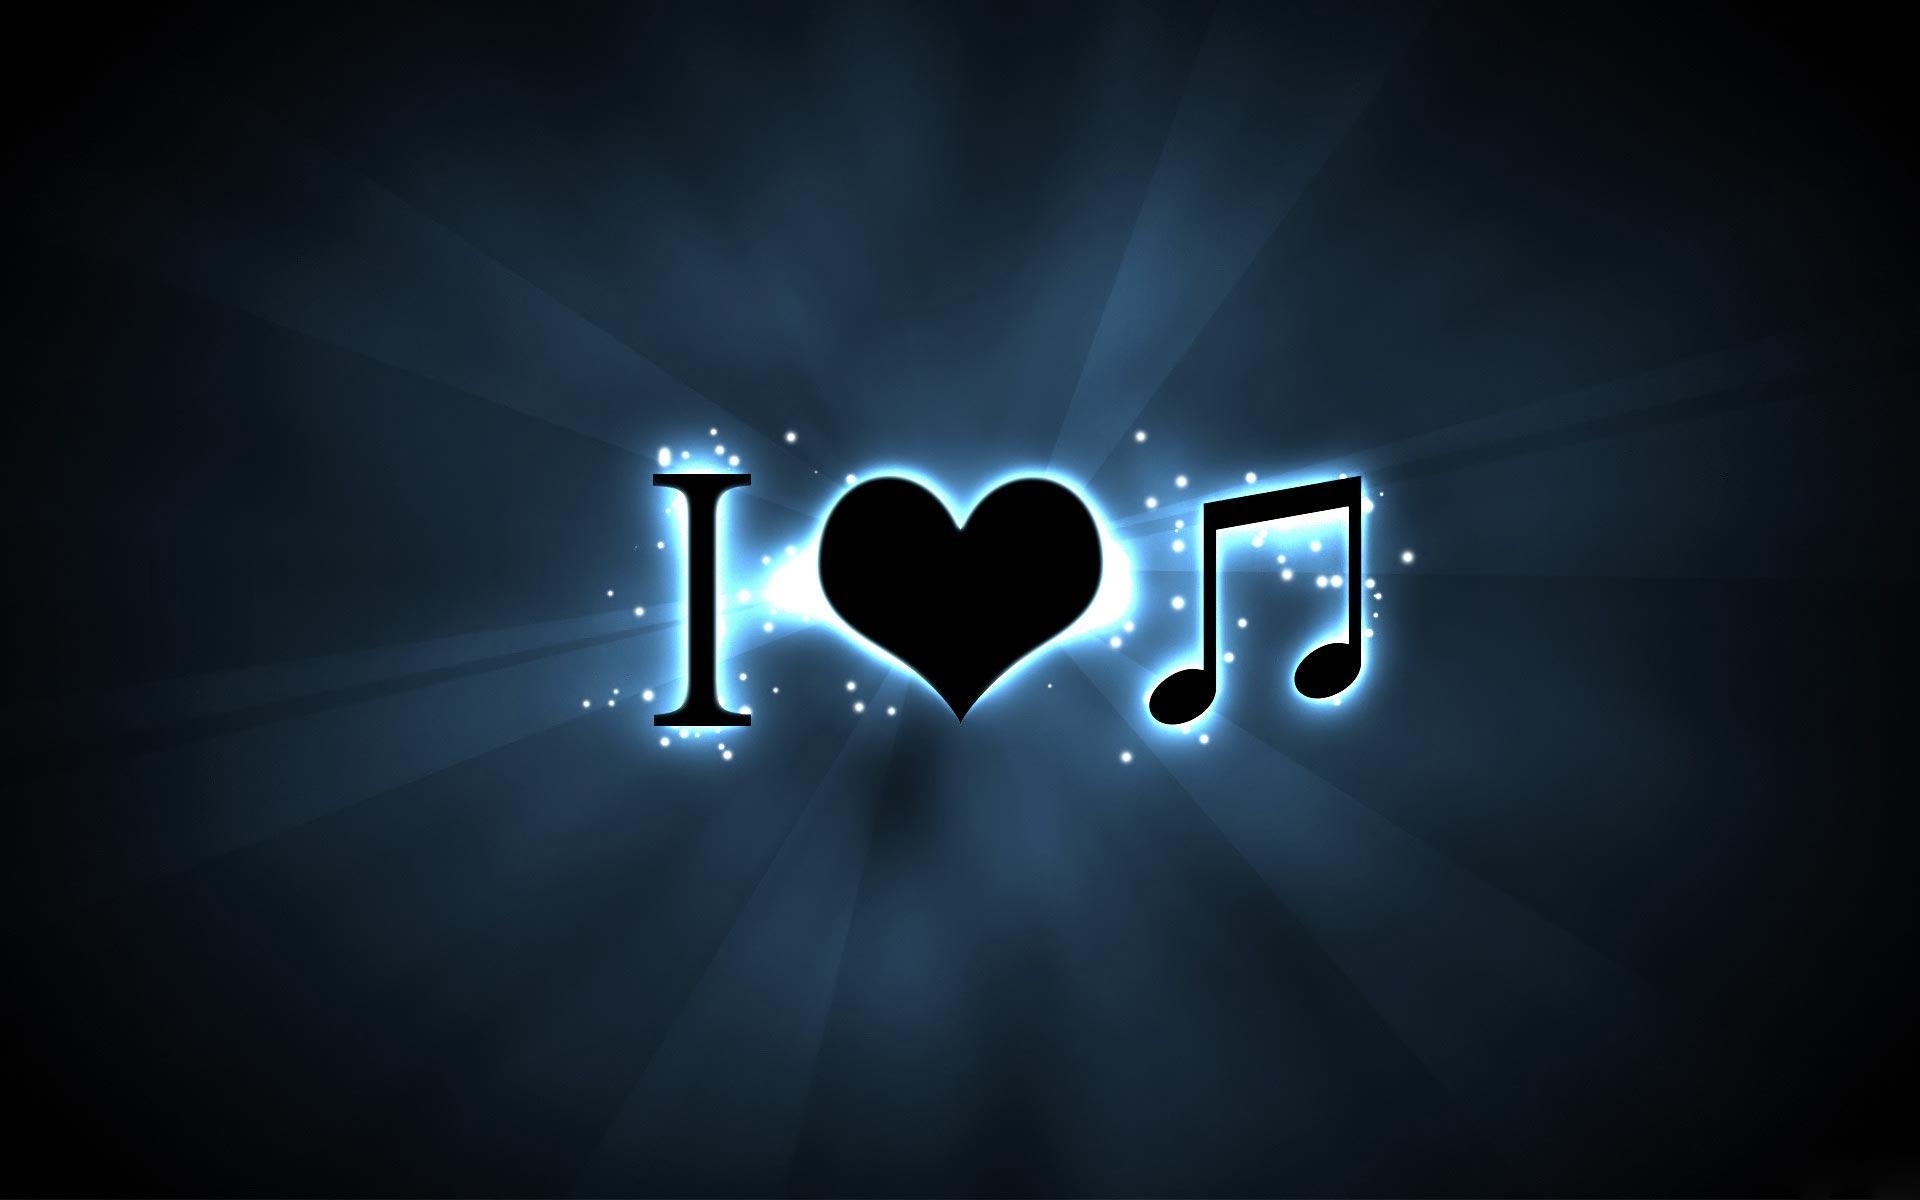 Colorful musical notes wallpaper - Music wallpapers - #19434